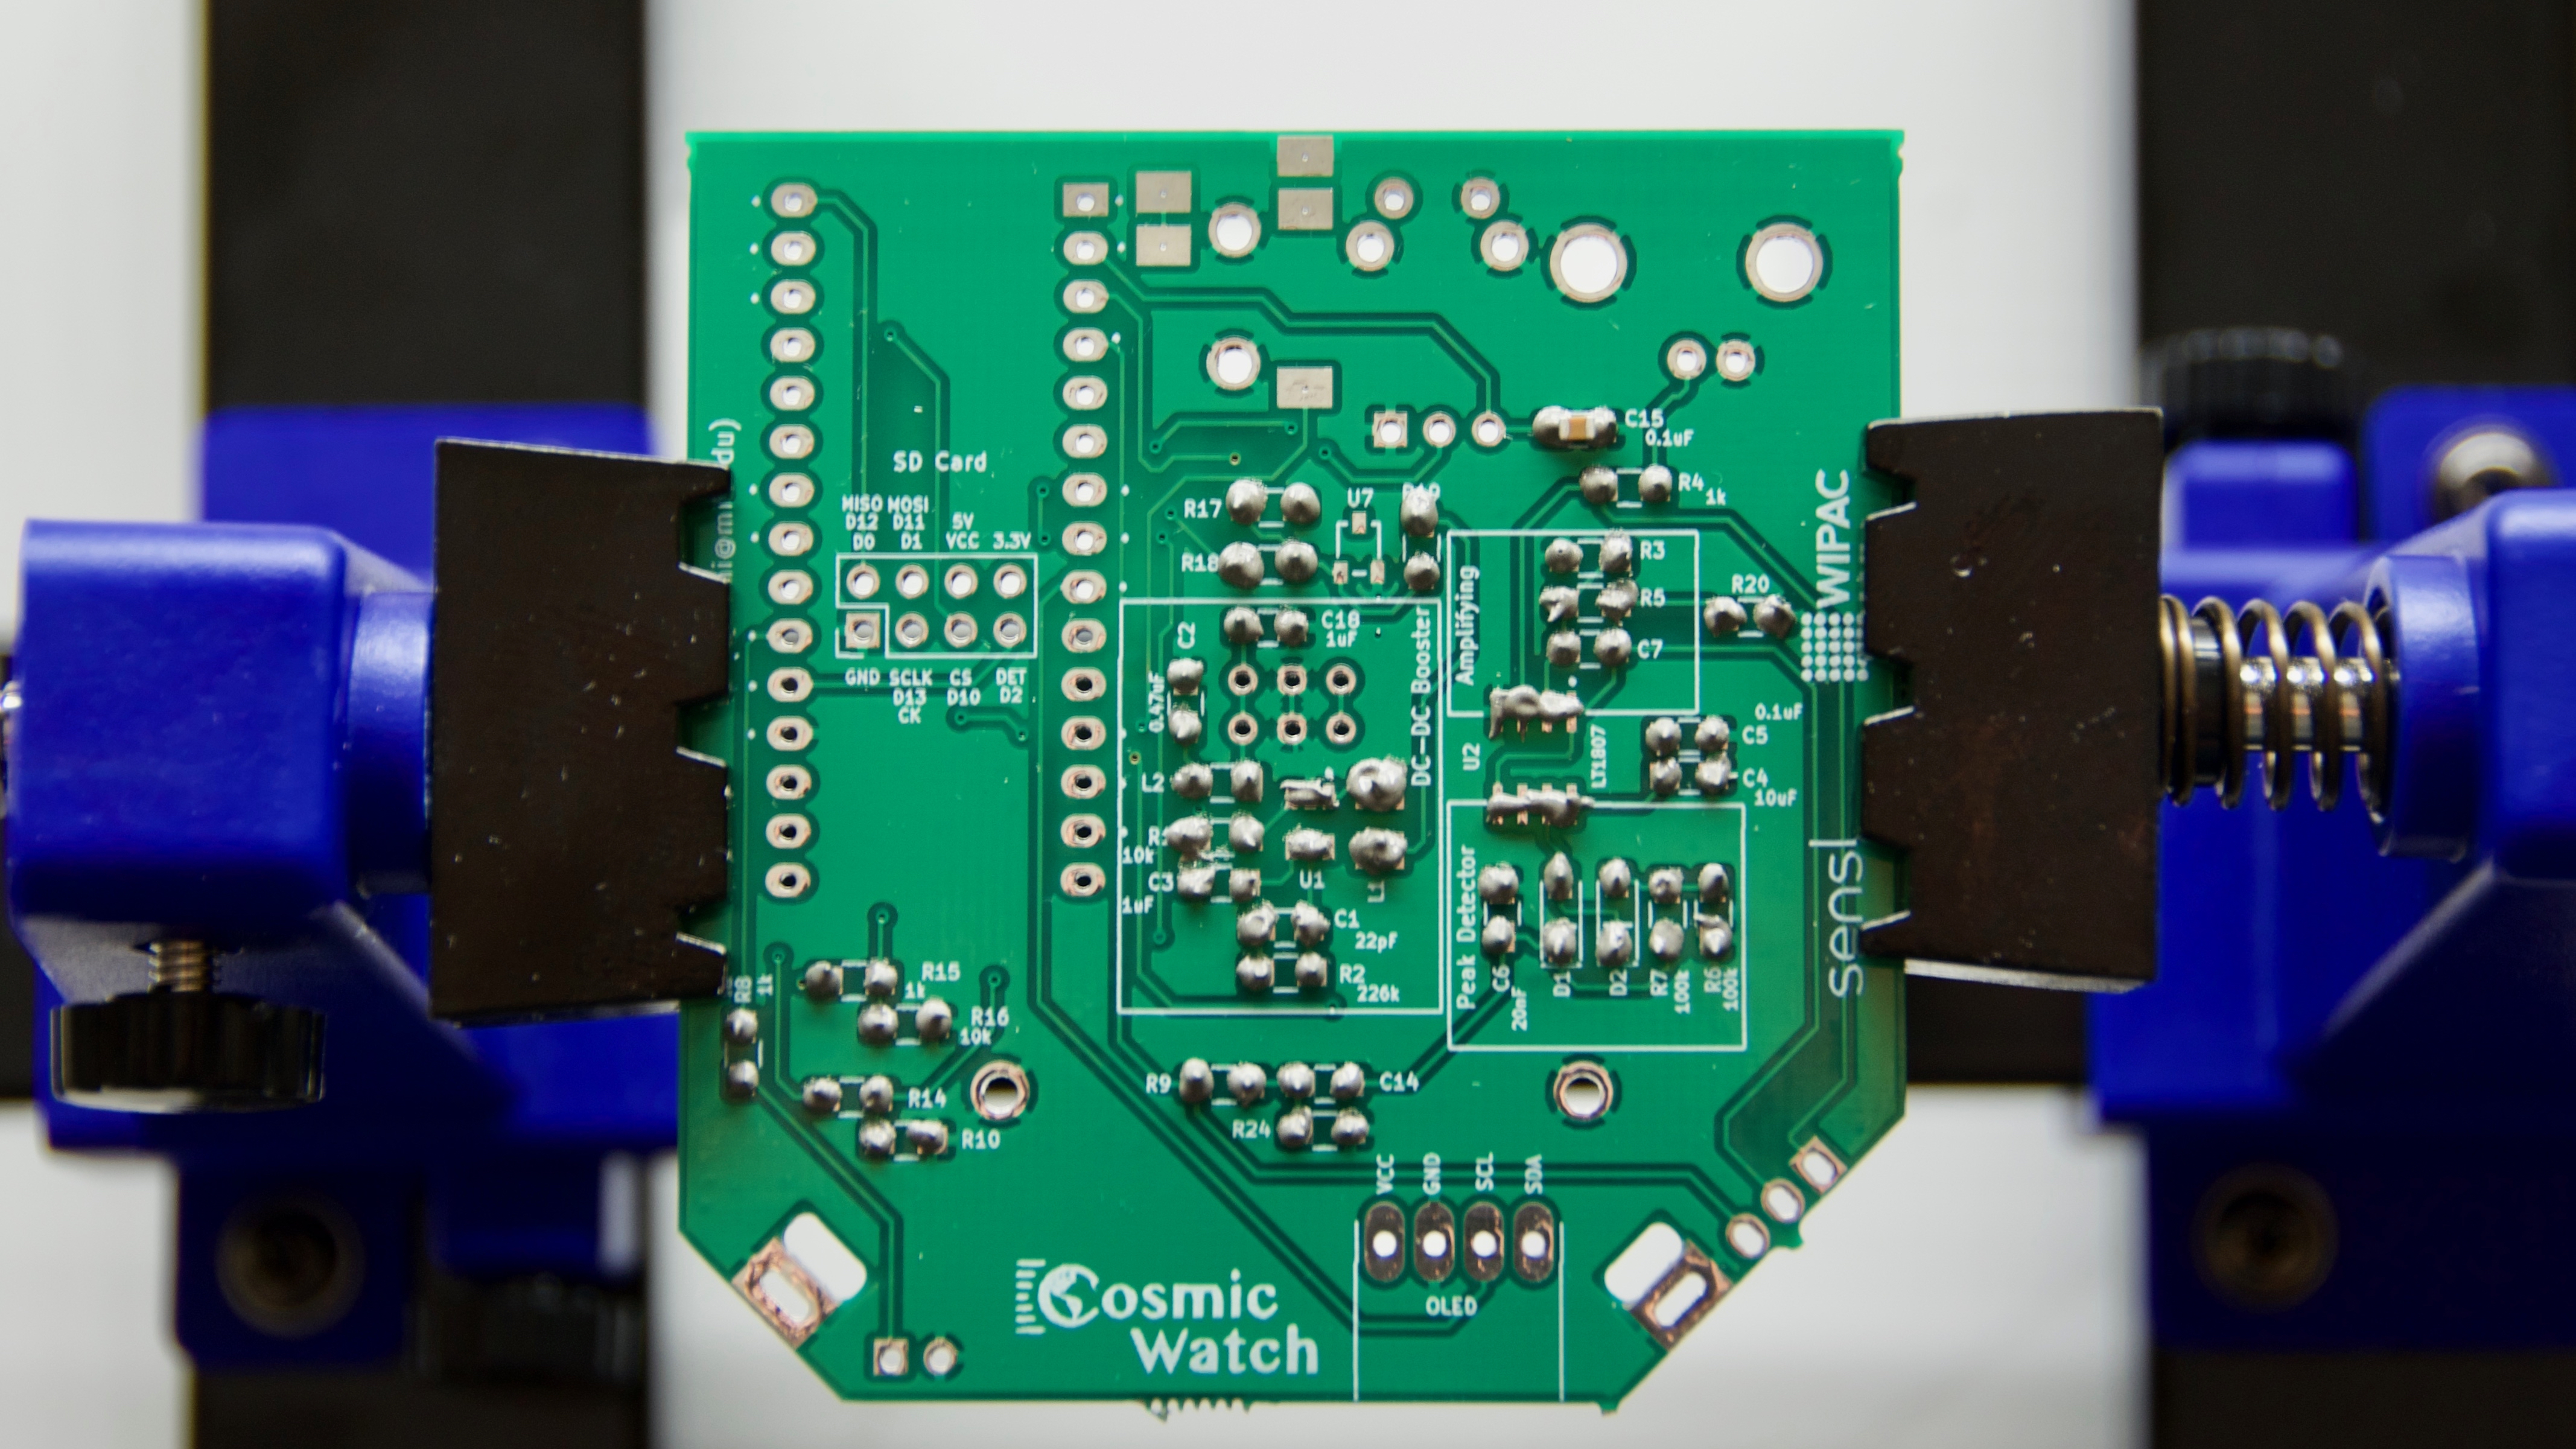 Soldering of components on Main PCB.